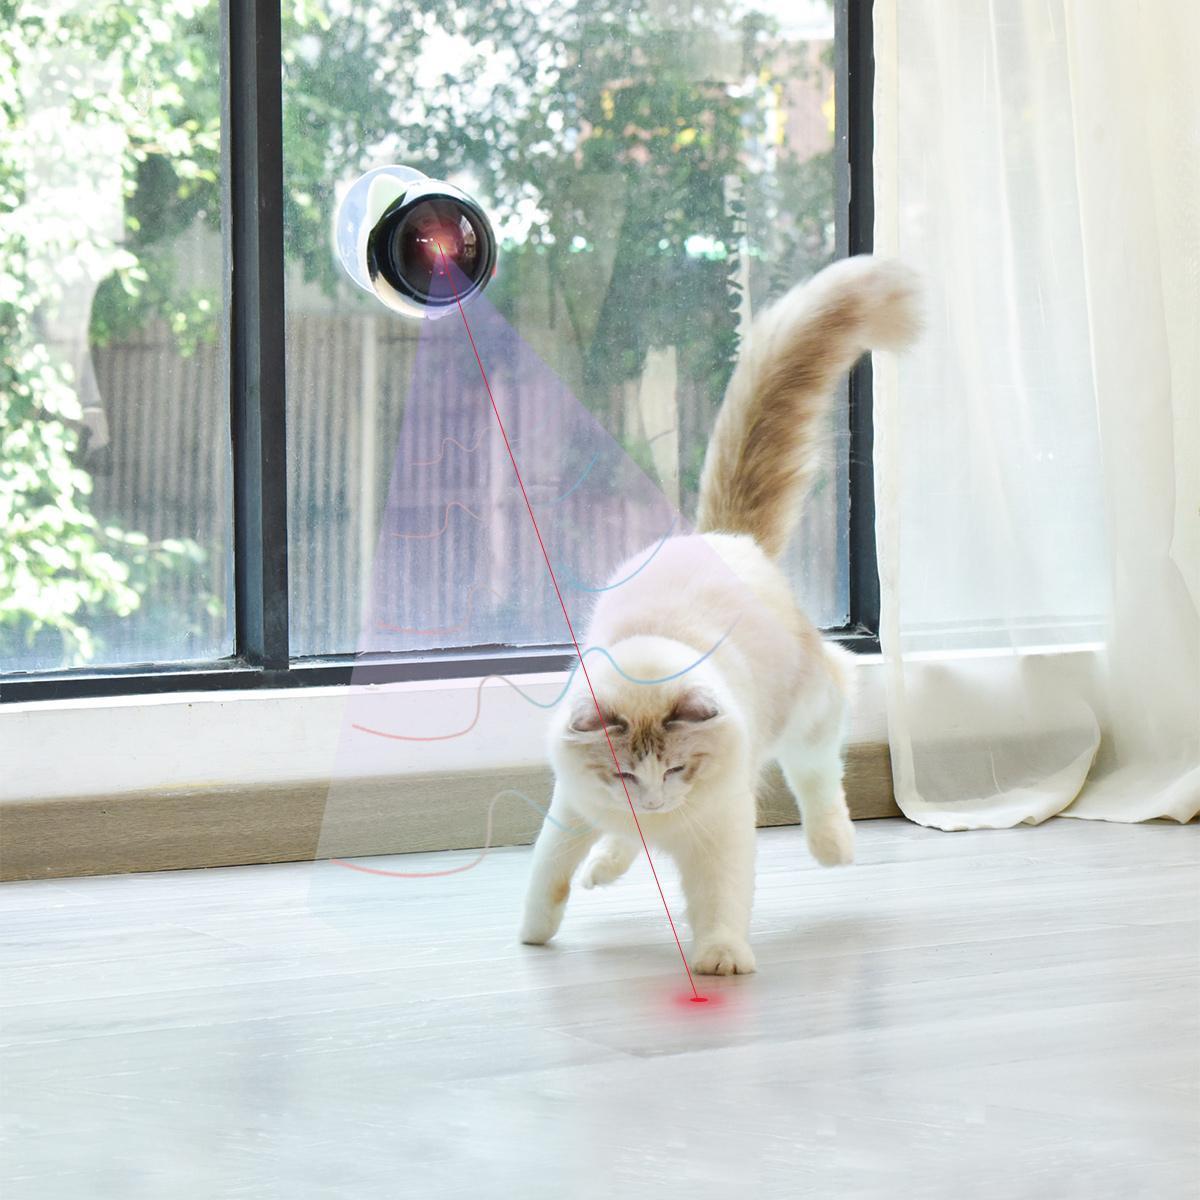 10 Best Automatic Laser Cat Toy 2023 - Buyer's Guide